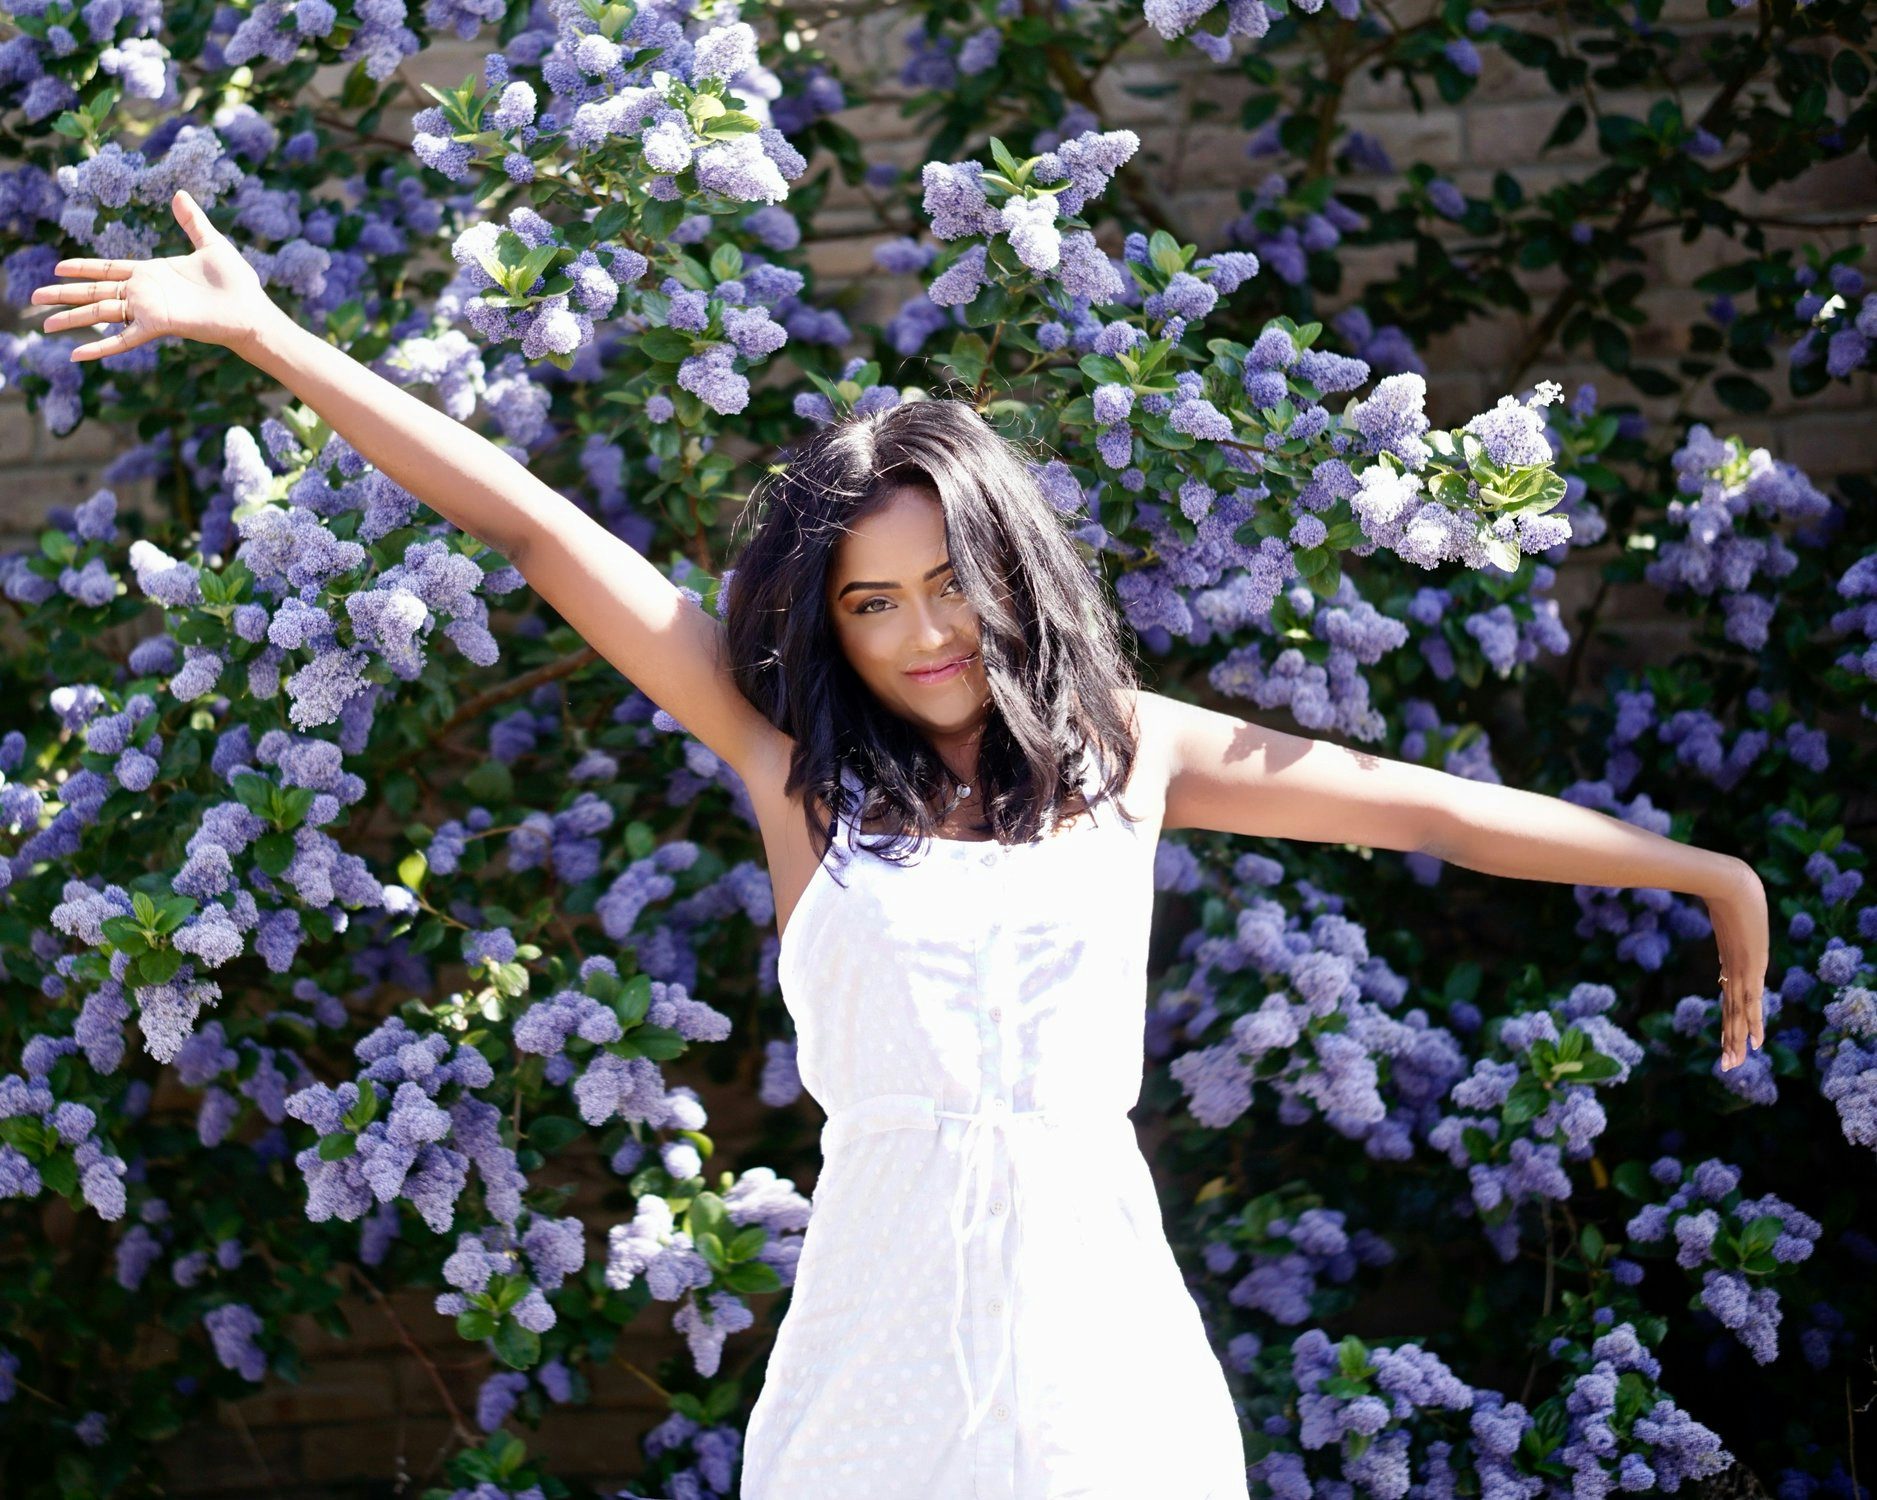 Sachini wearing a white dress in front of a tree with purple flowers